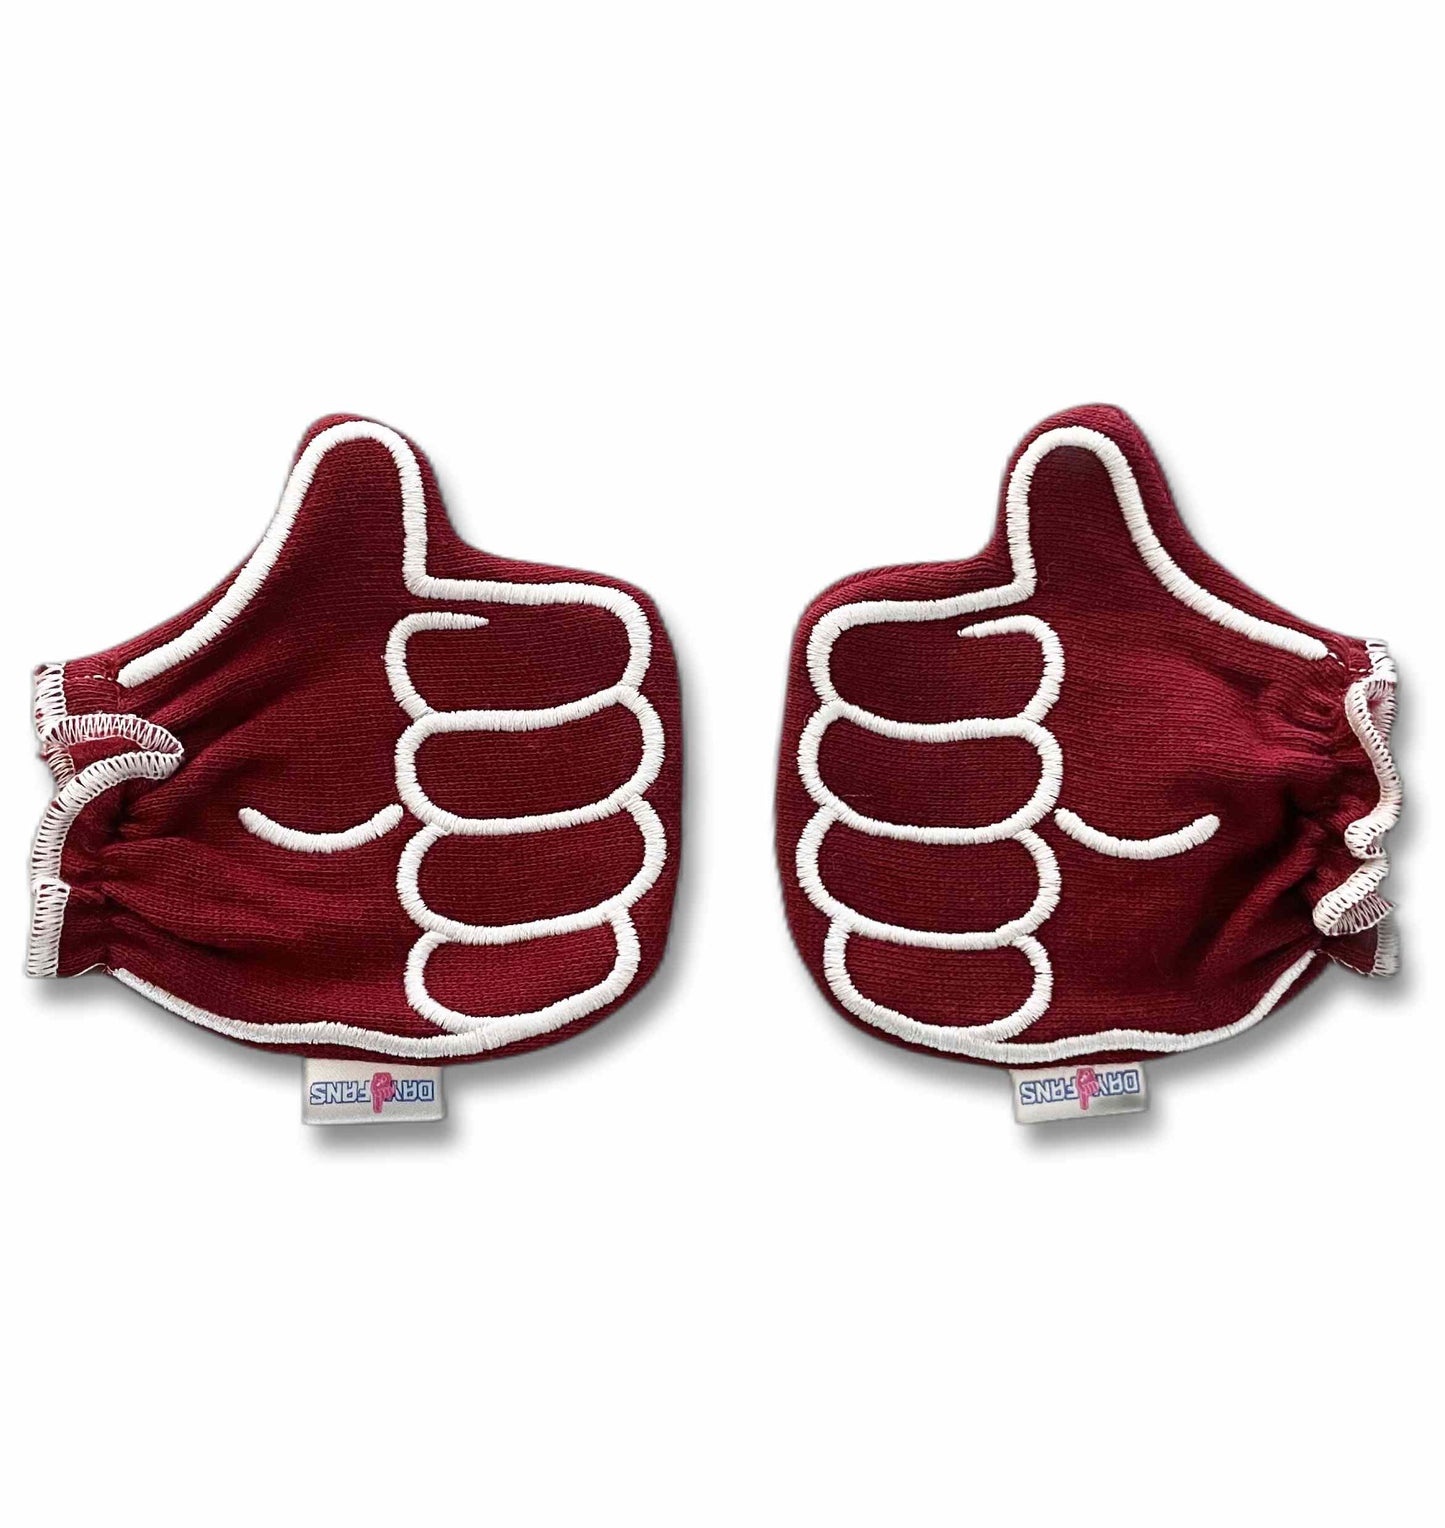 Texas A&M Gig Em FanMitts Baby Mittens Maroon Front Pair